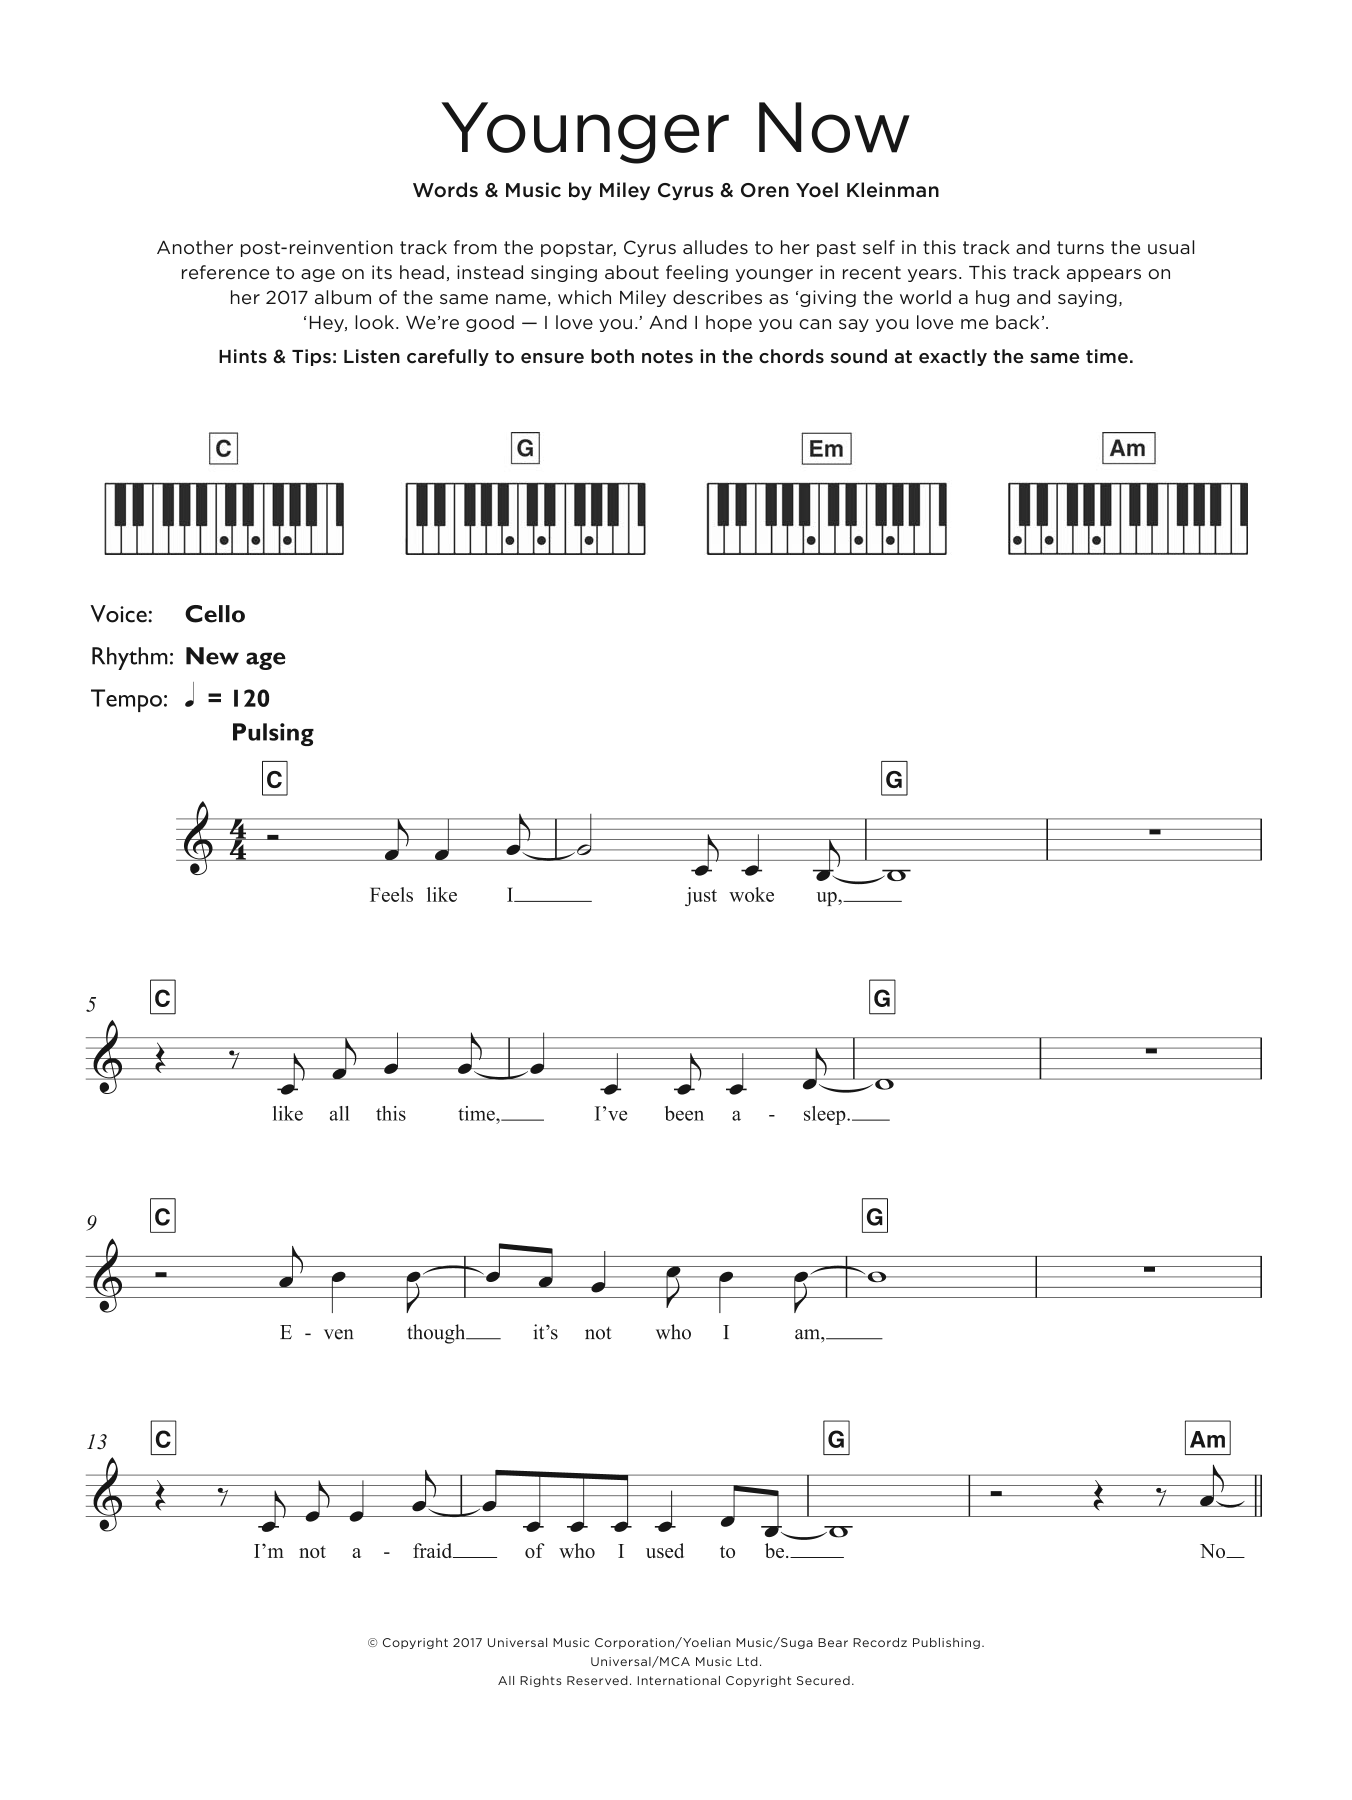 Download Miley Cyrus Younger Now Sheet Music